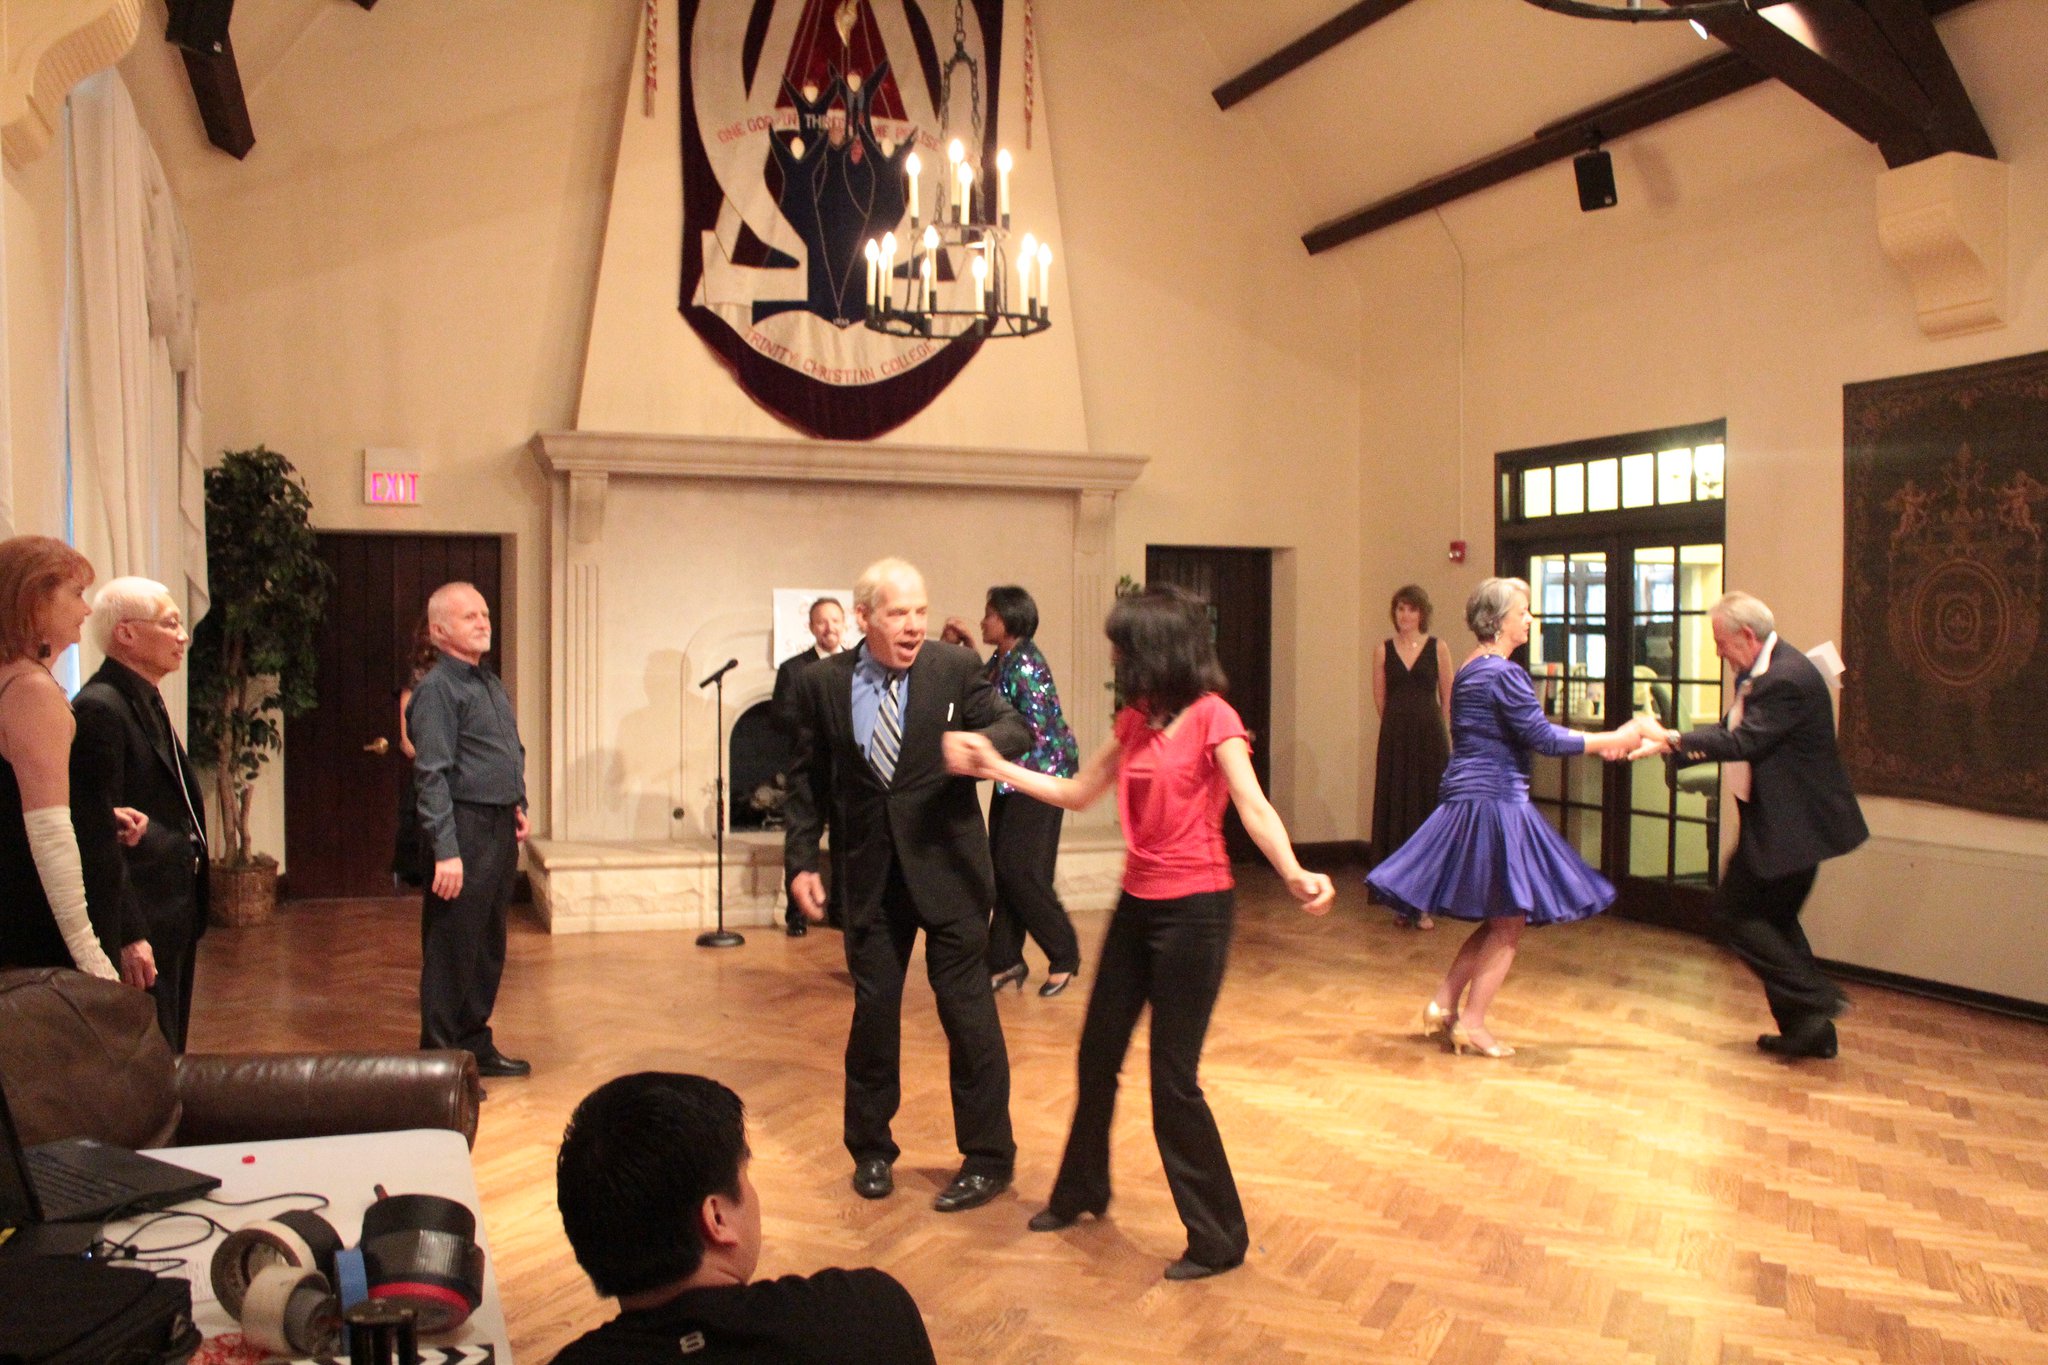 'Broken and Beautiful' shoot. My character 'Blair' (purple dress) wins the Senior Center dance competition for the 4th year in a row. Co-star: John McDonnell.